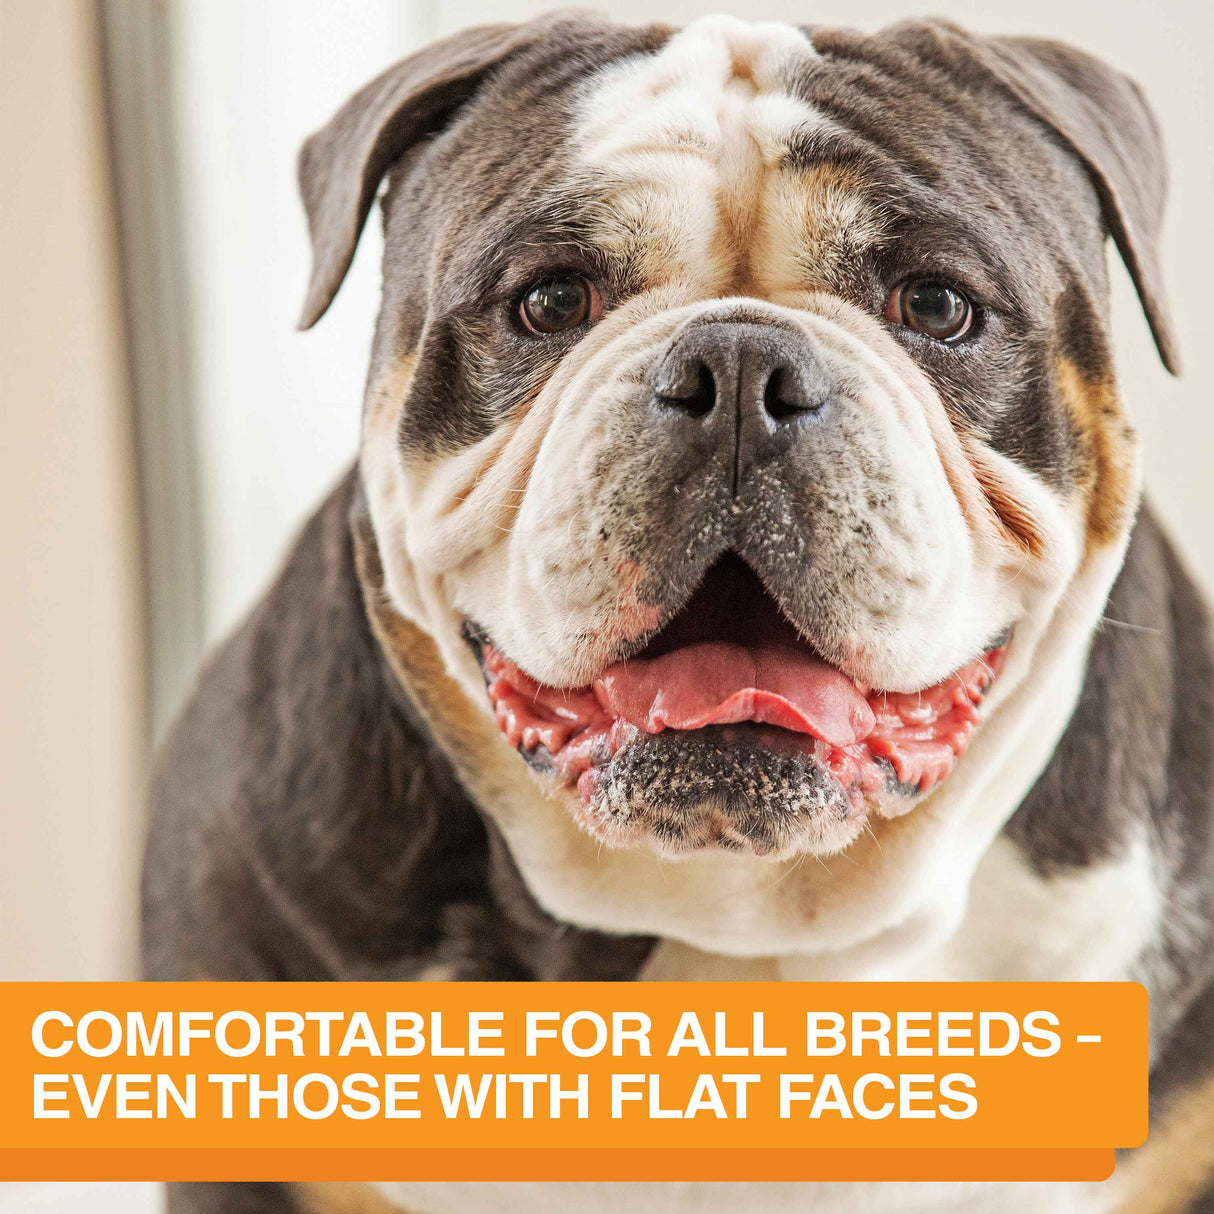 Flat faced breeds can comfortably eat from The Niner